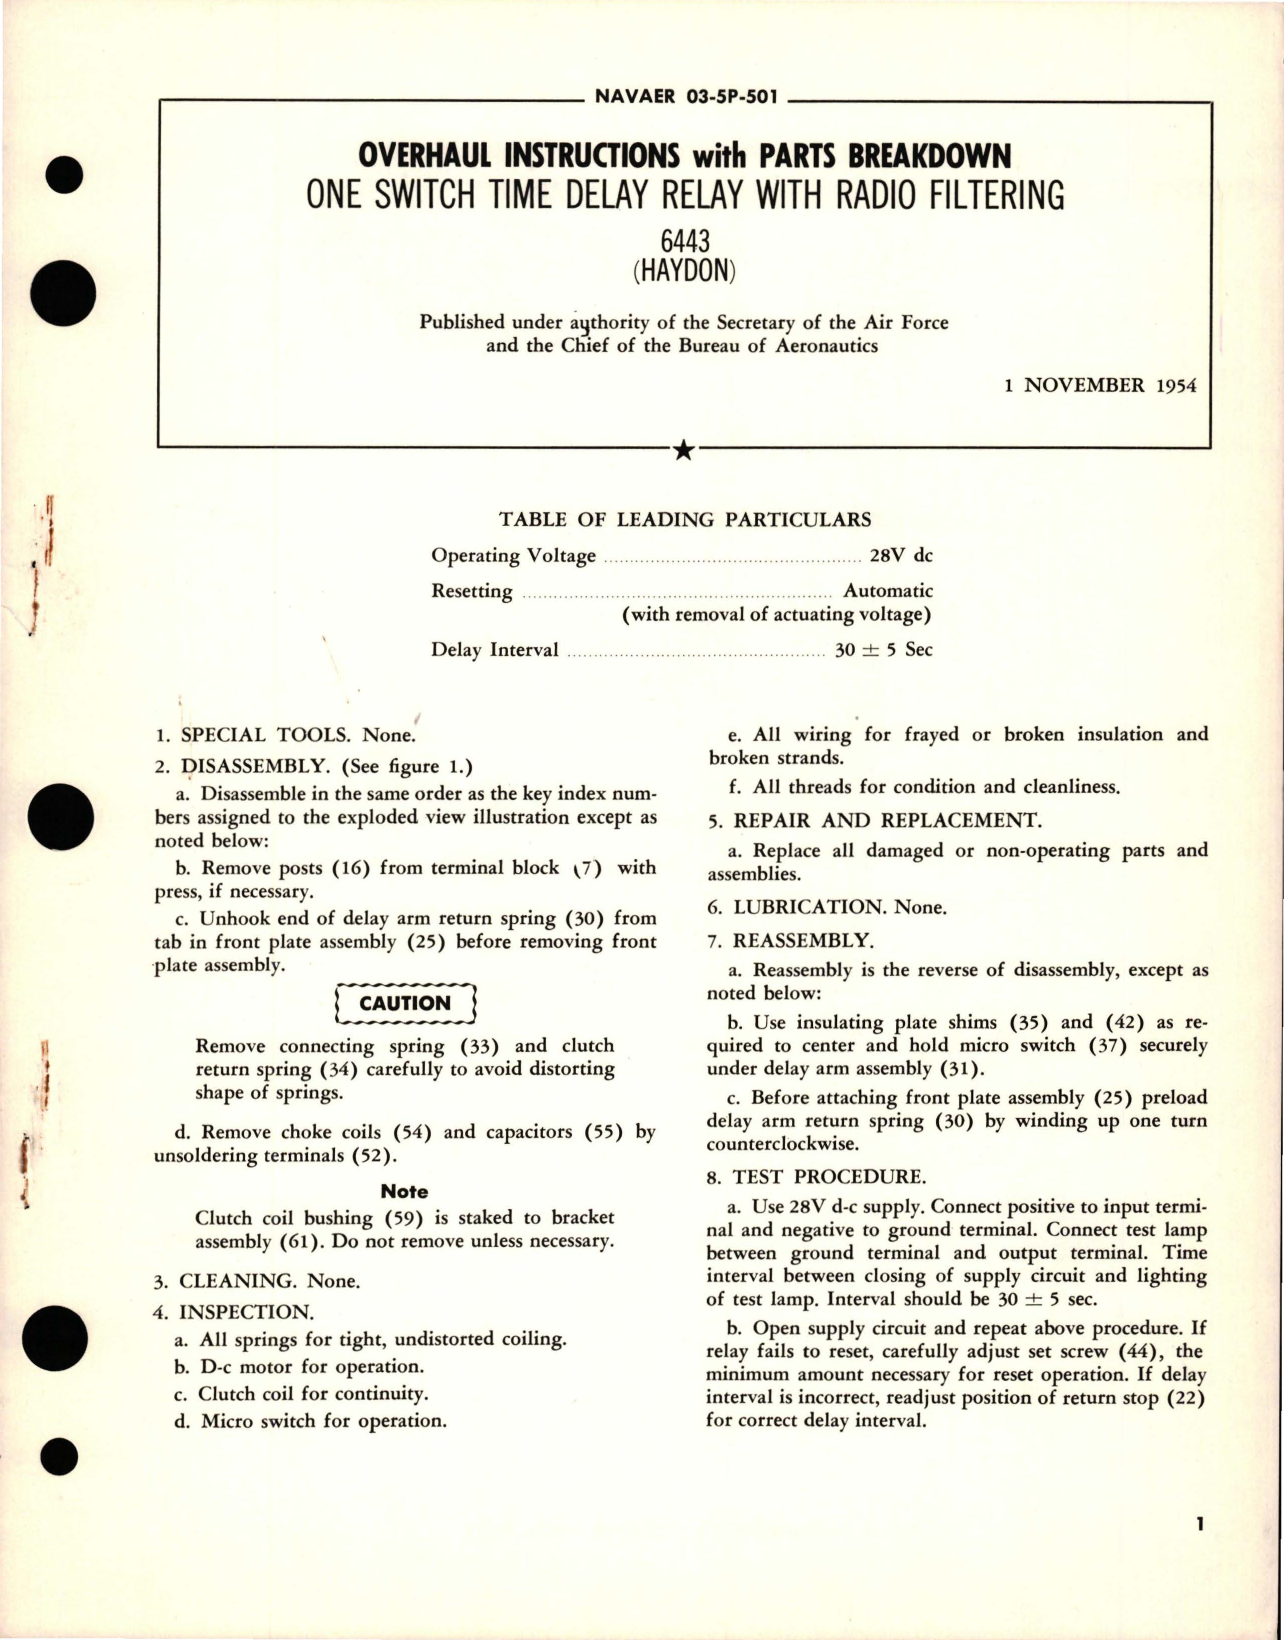 Sample page 1 from AirCorps Library document: Overhaul Instructions with Parts Breakdown for One Switch Time Delay Relay with Radio Filtering - 6443